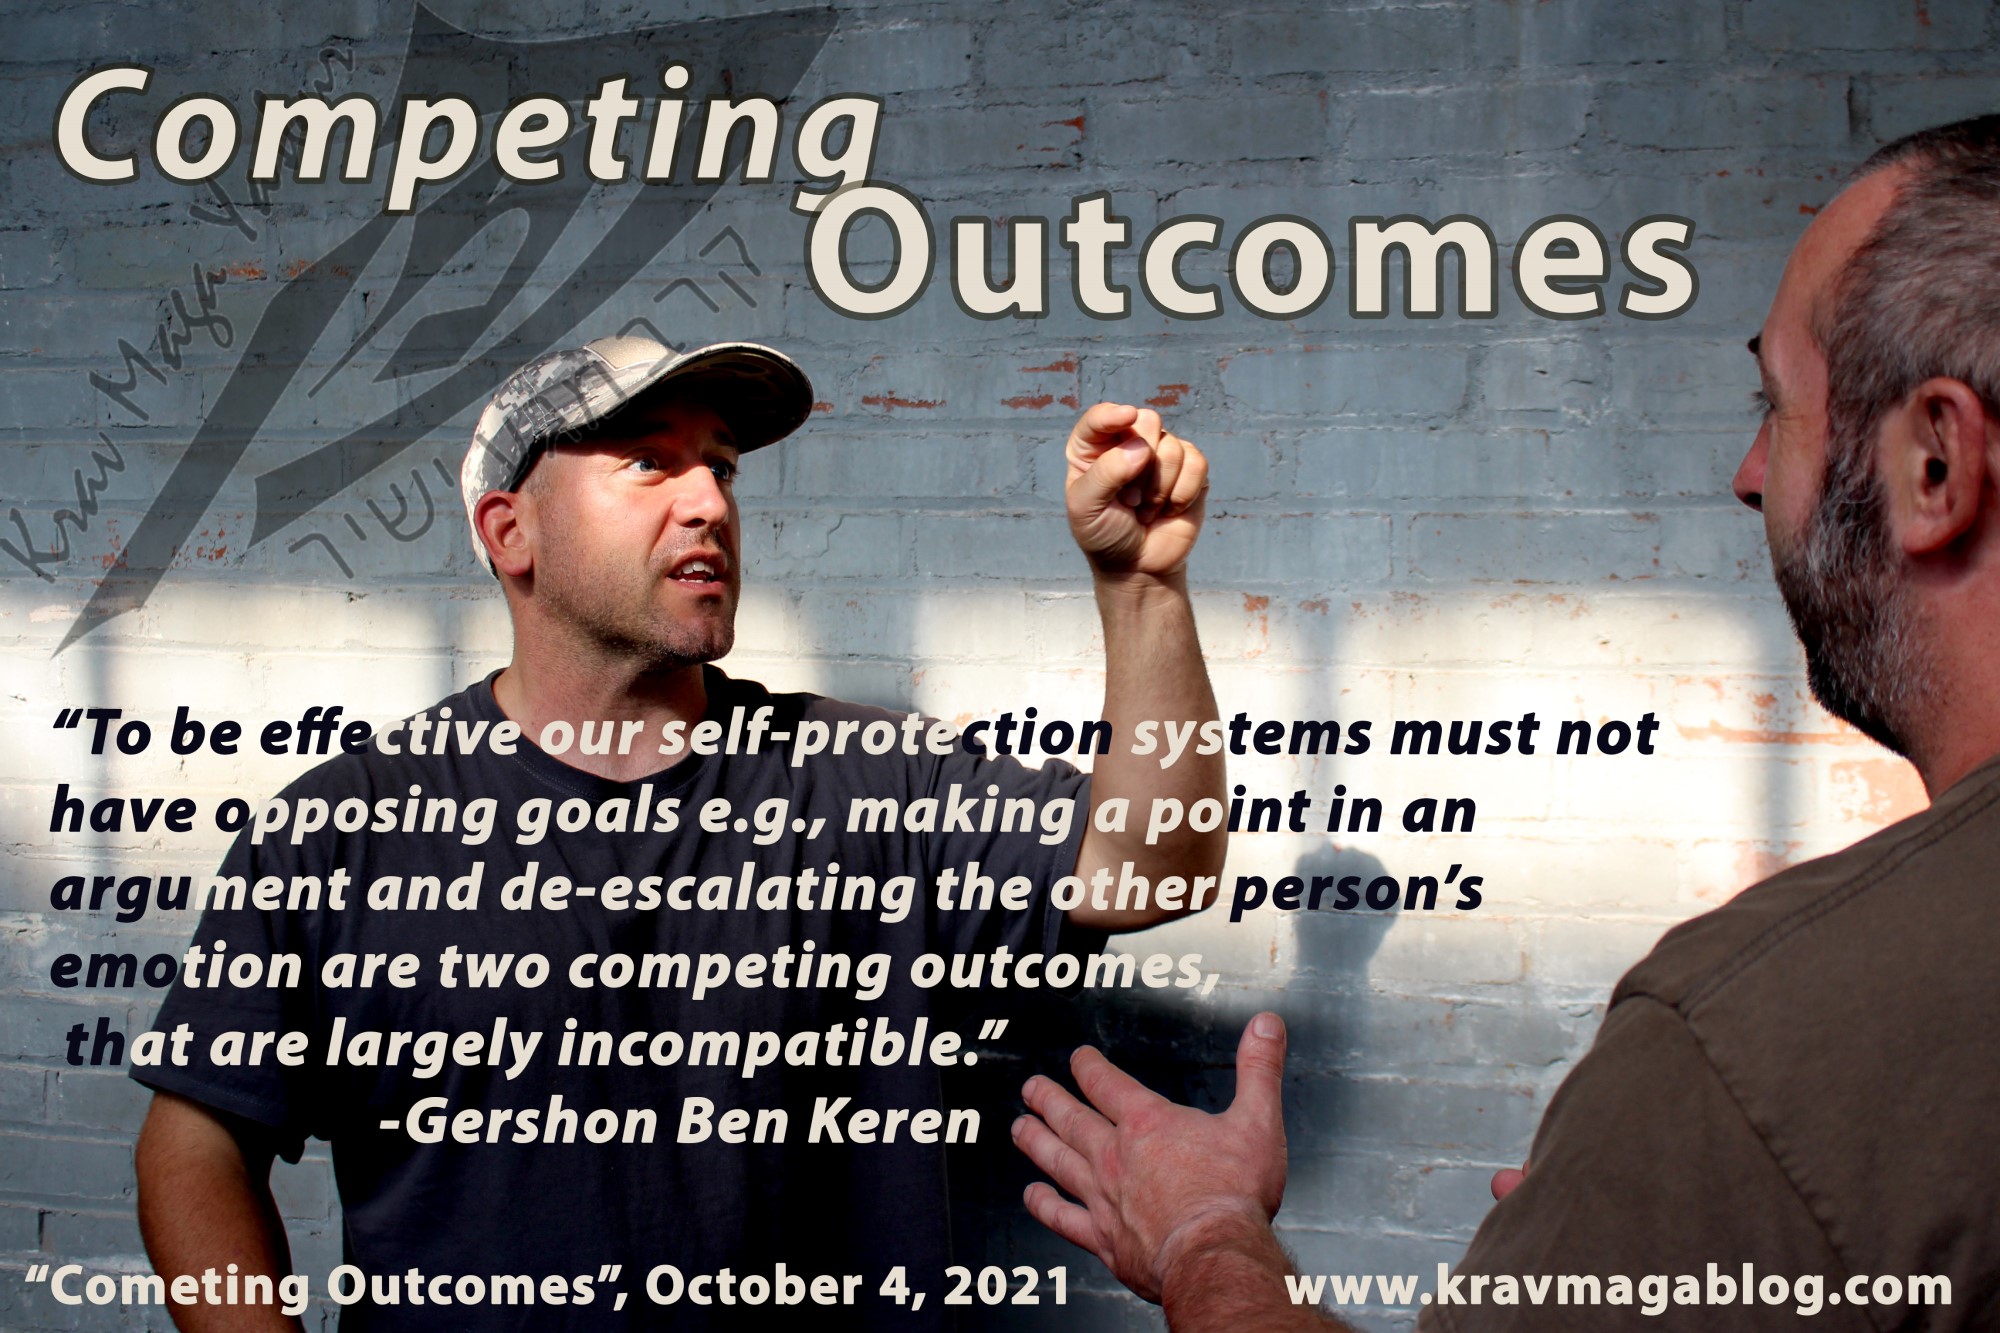 Blog About Competing Outcomes